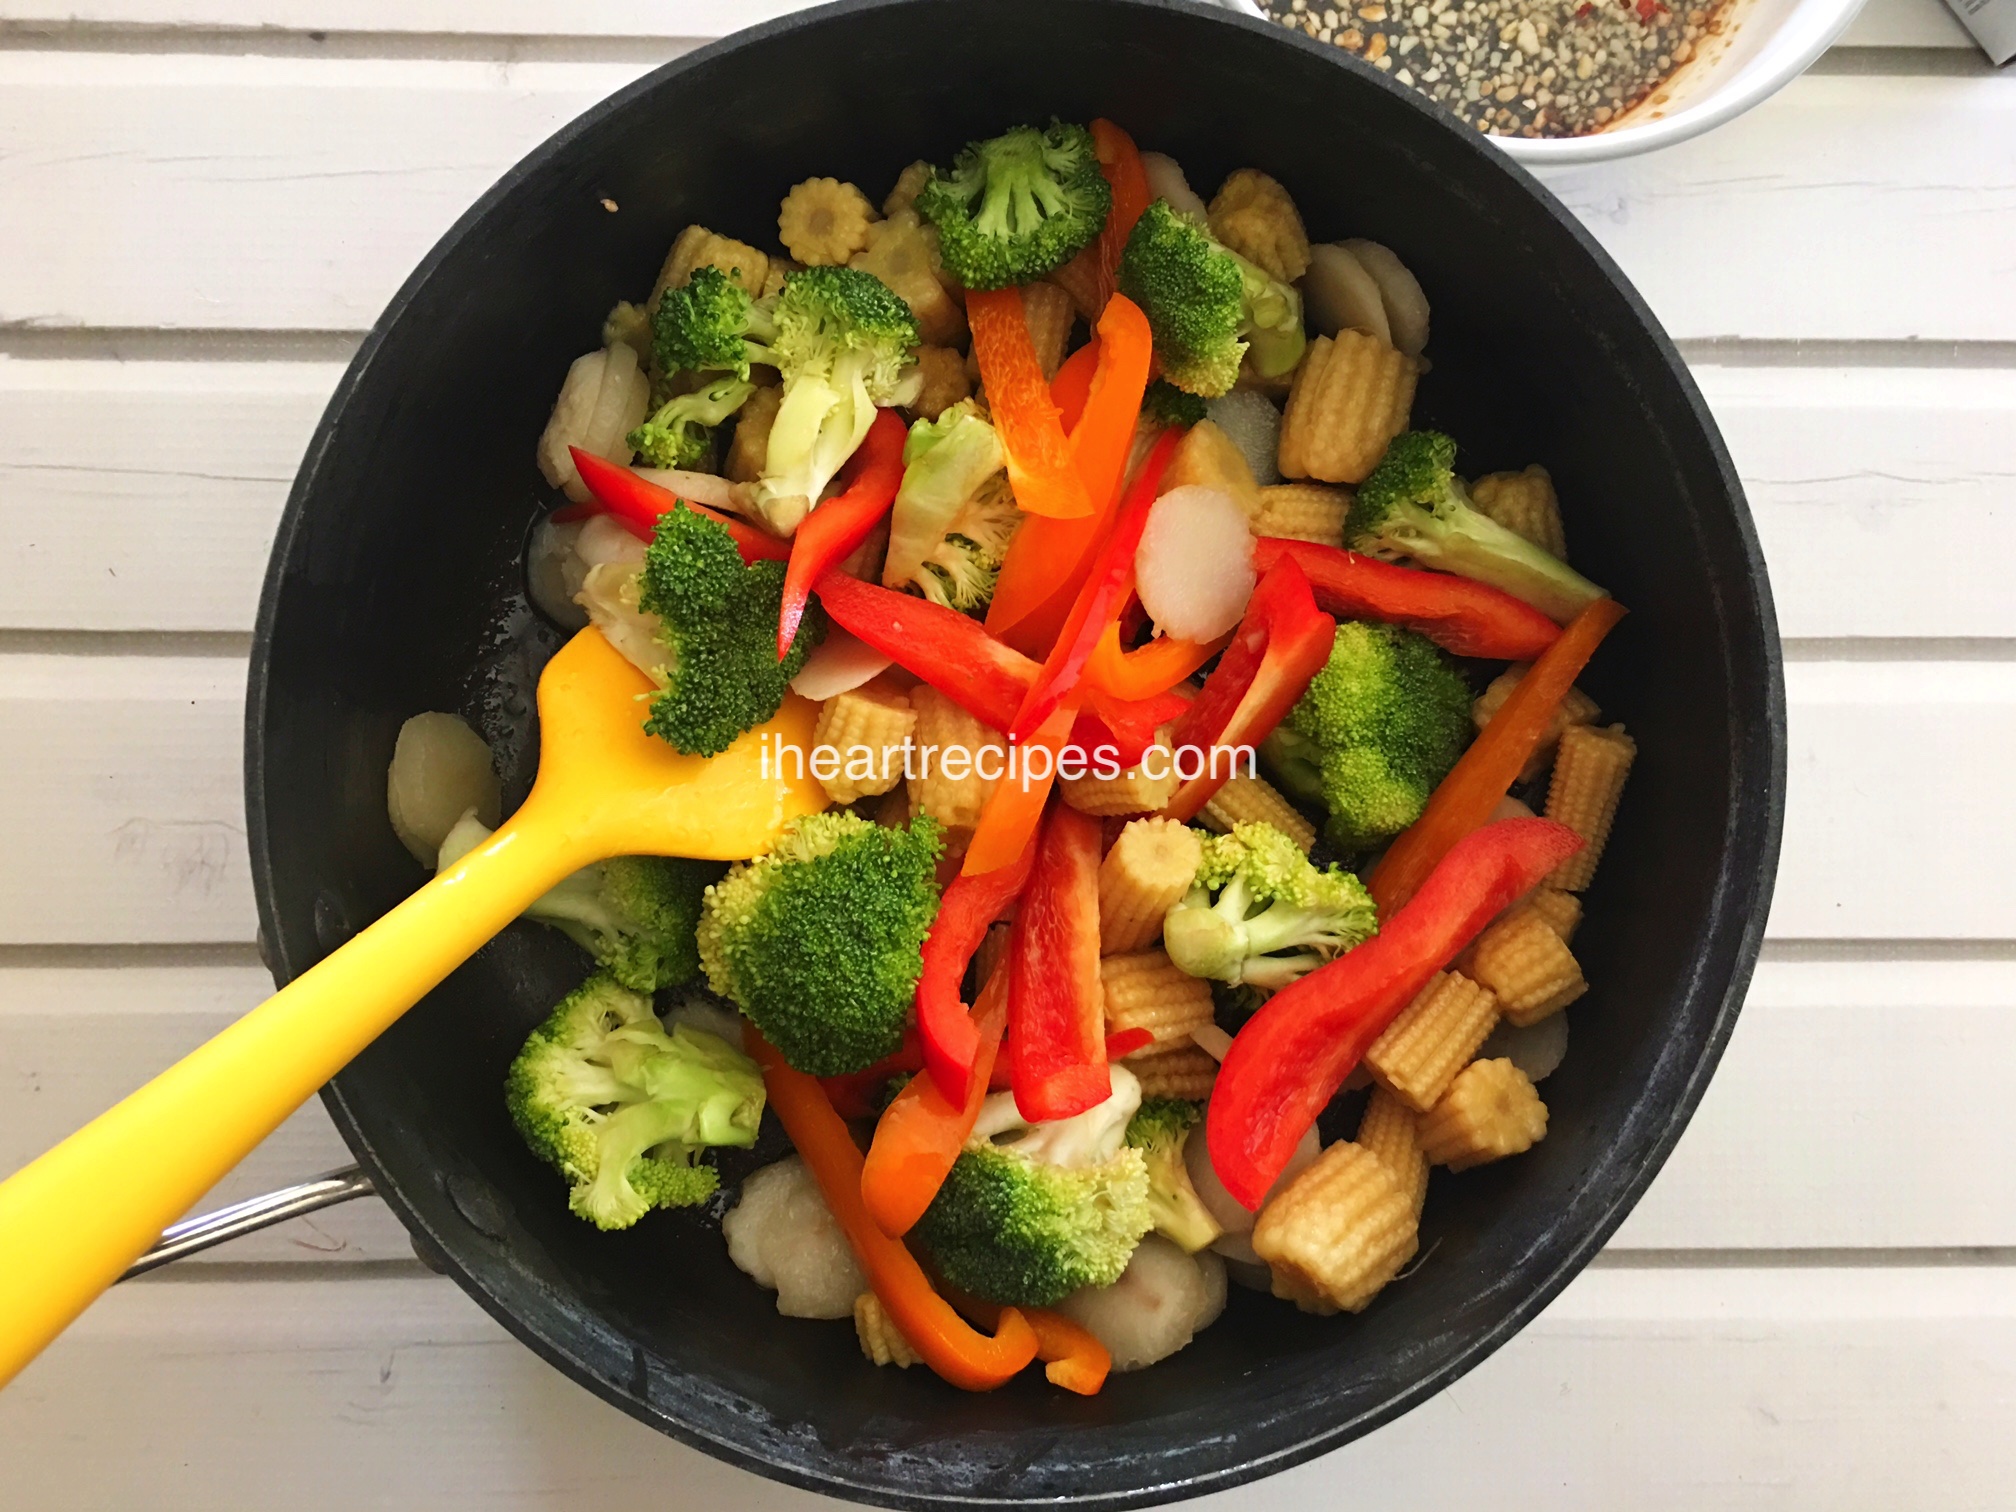 A large bowl of fresh veggies for a vegetable stir fry -- peppers, broccoli, baby corns, and water chestnuts.